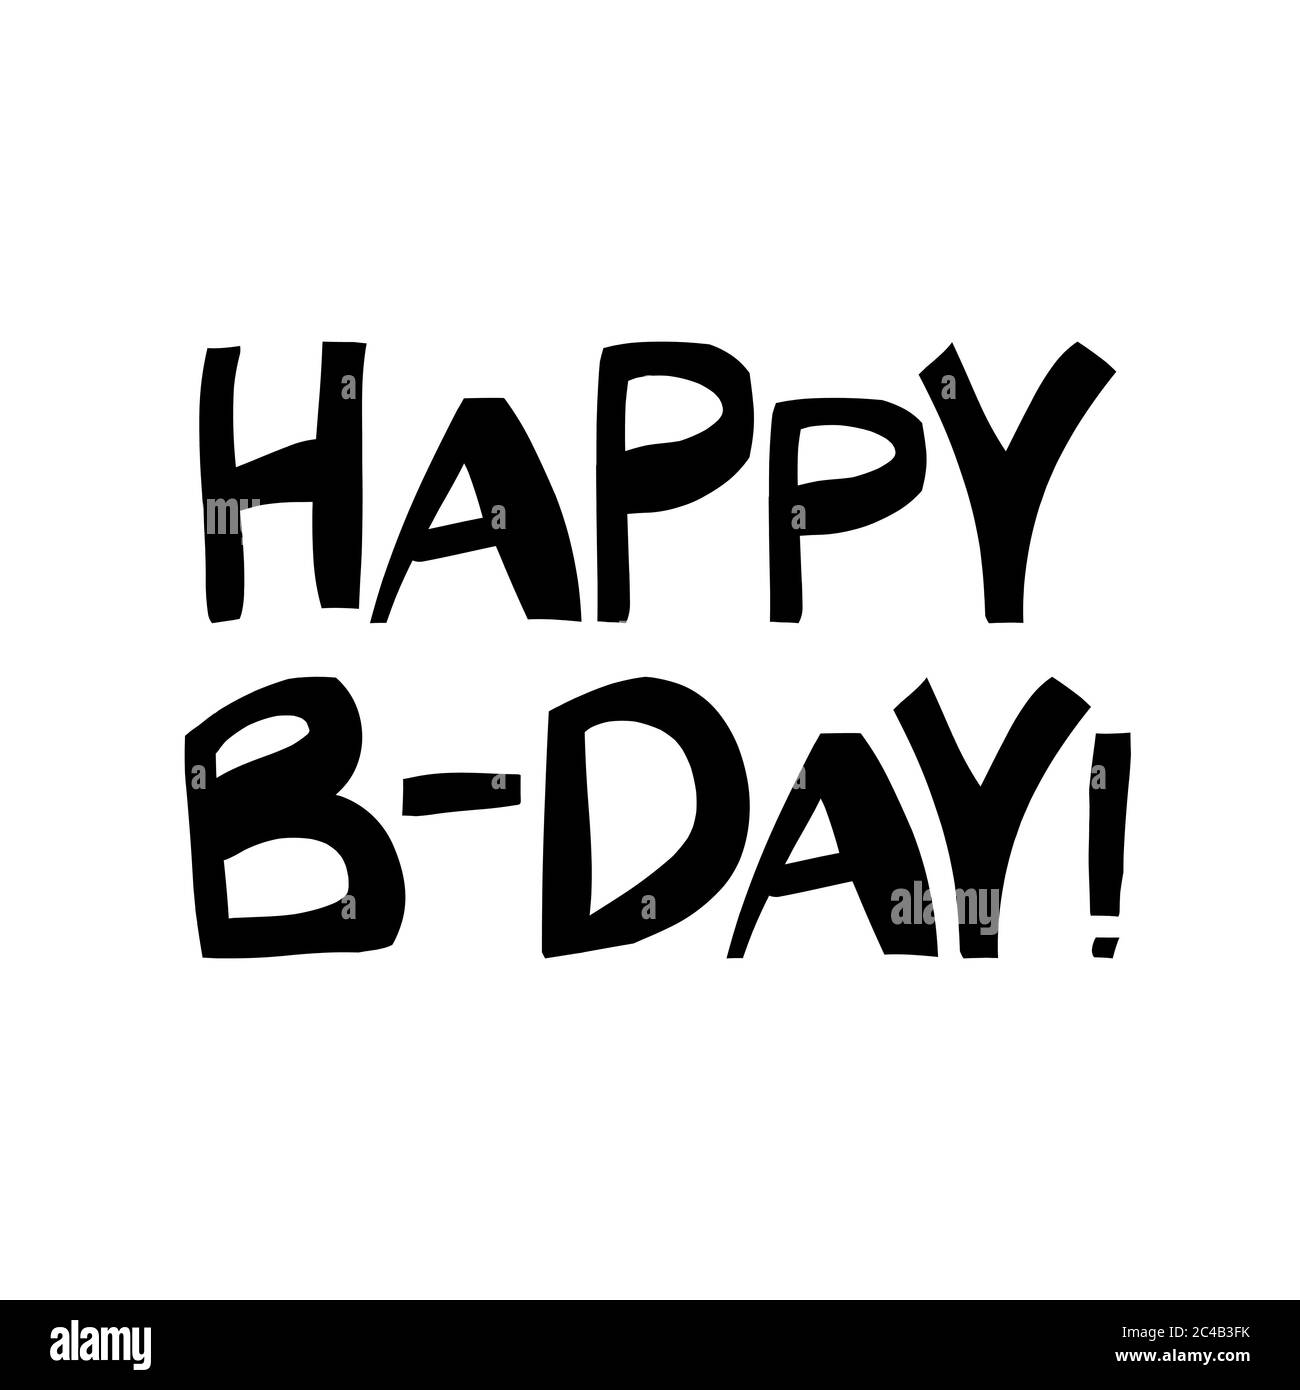 Happy Birthday Stock Vector High Resolution Stock Photography And Images Alamy Give your customers a special touch when they deliver your orders. https www alamy com happy b day cute hand drawn lettering in modern scandinavian style isolated on white vector stock illustration image364120615 html